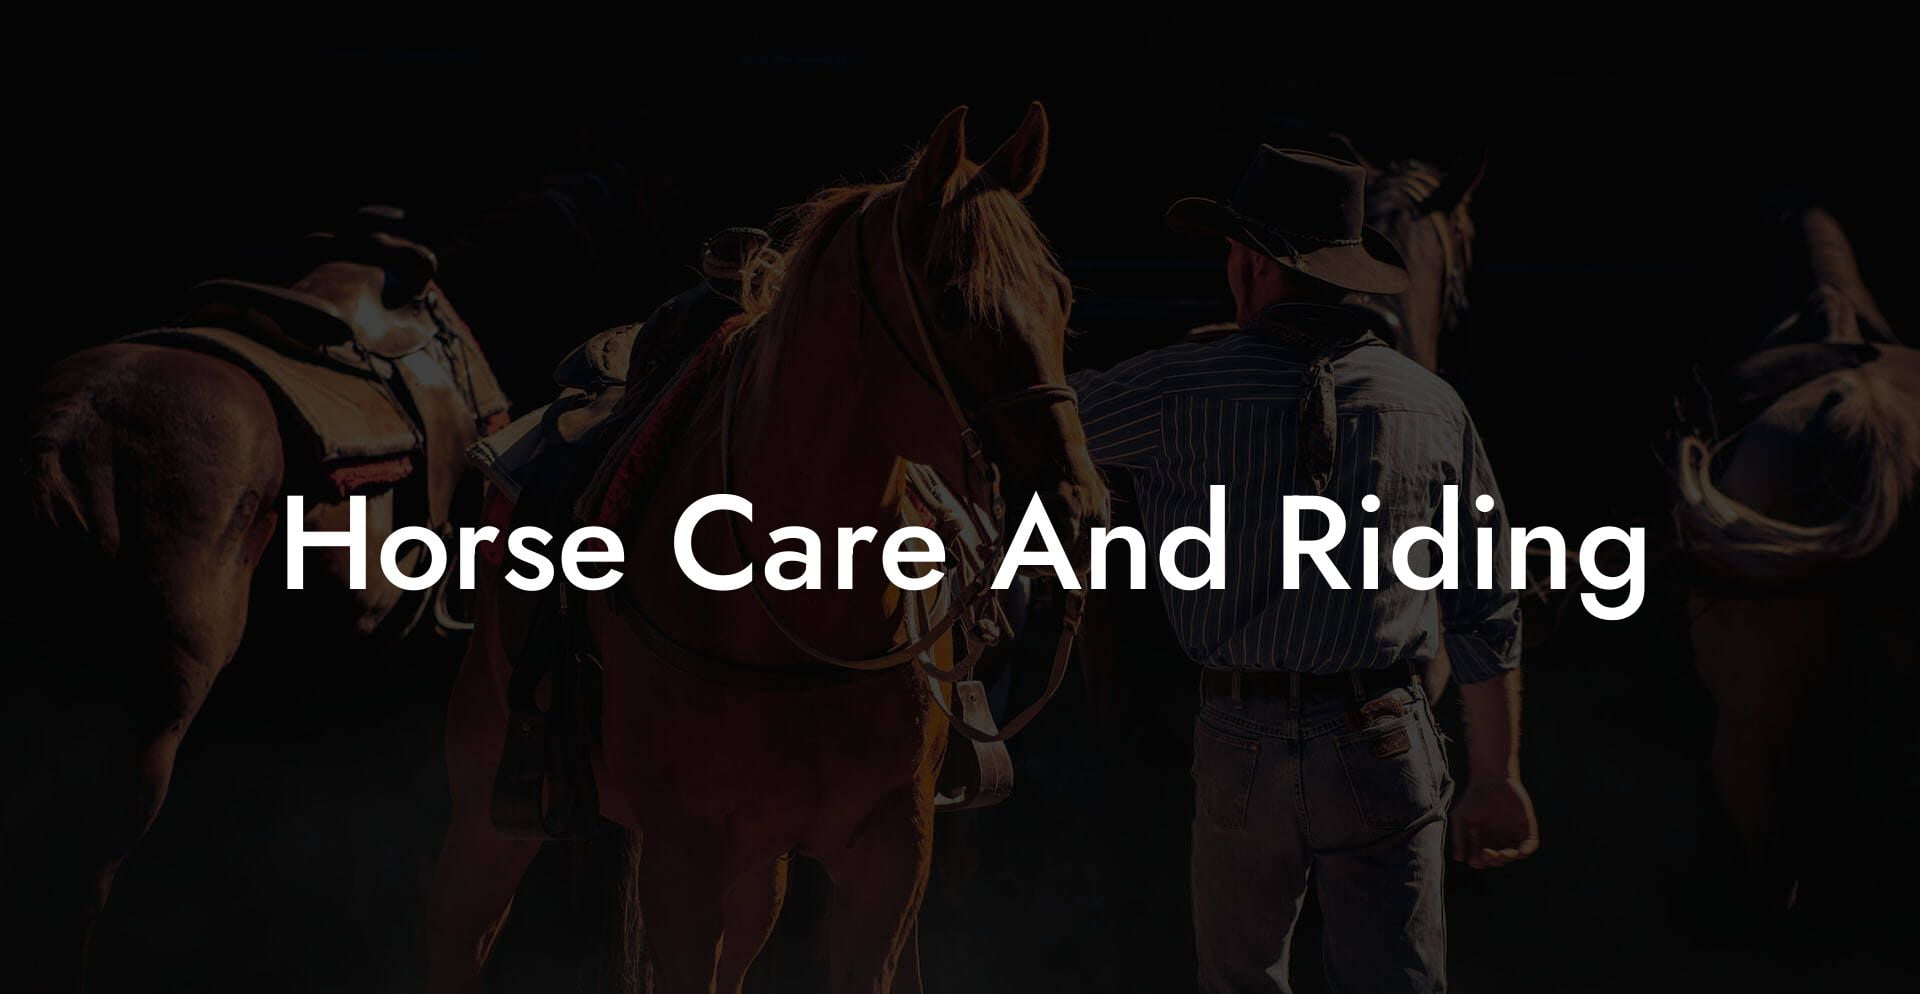 Horse Care And Riding